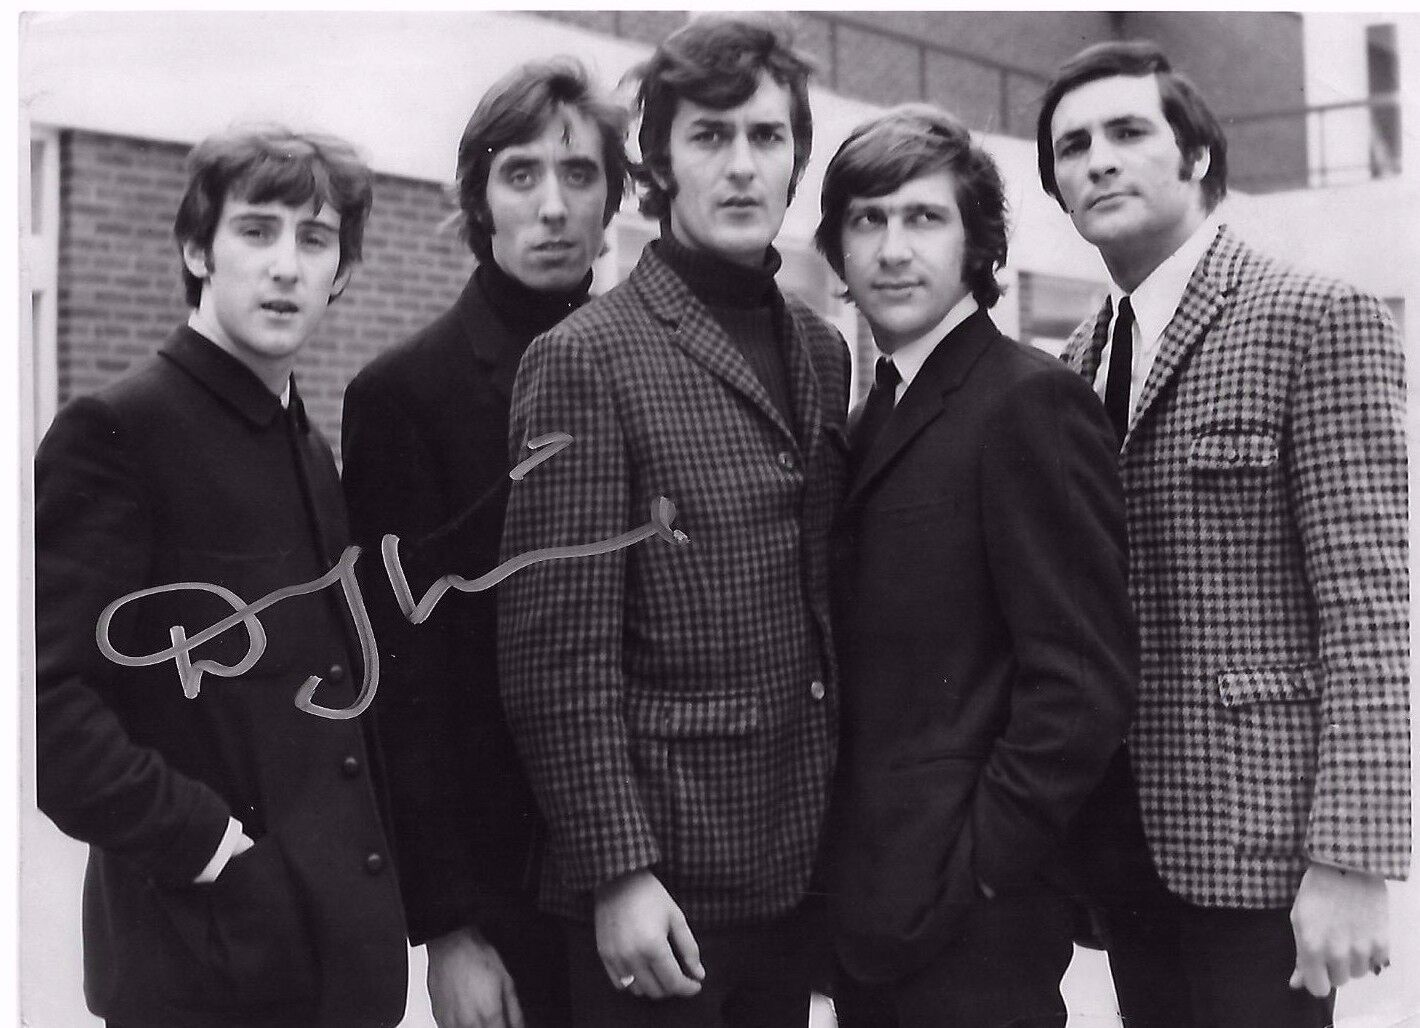 Denny Laine Signed 8x10 Photo Poster painting - Guitarist of Paul McCartney and Wings - G1048